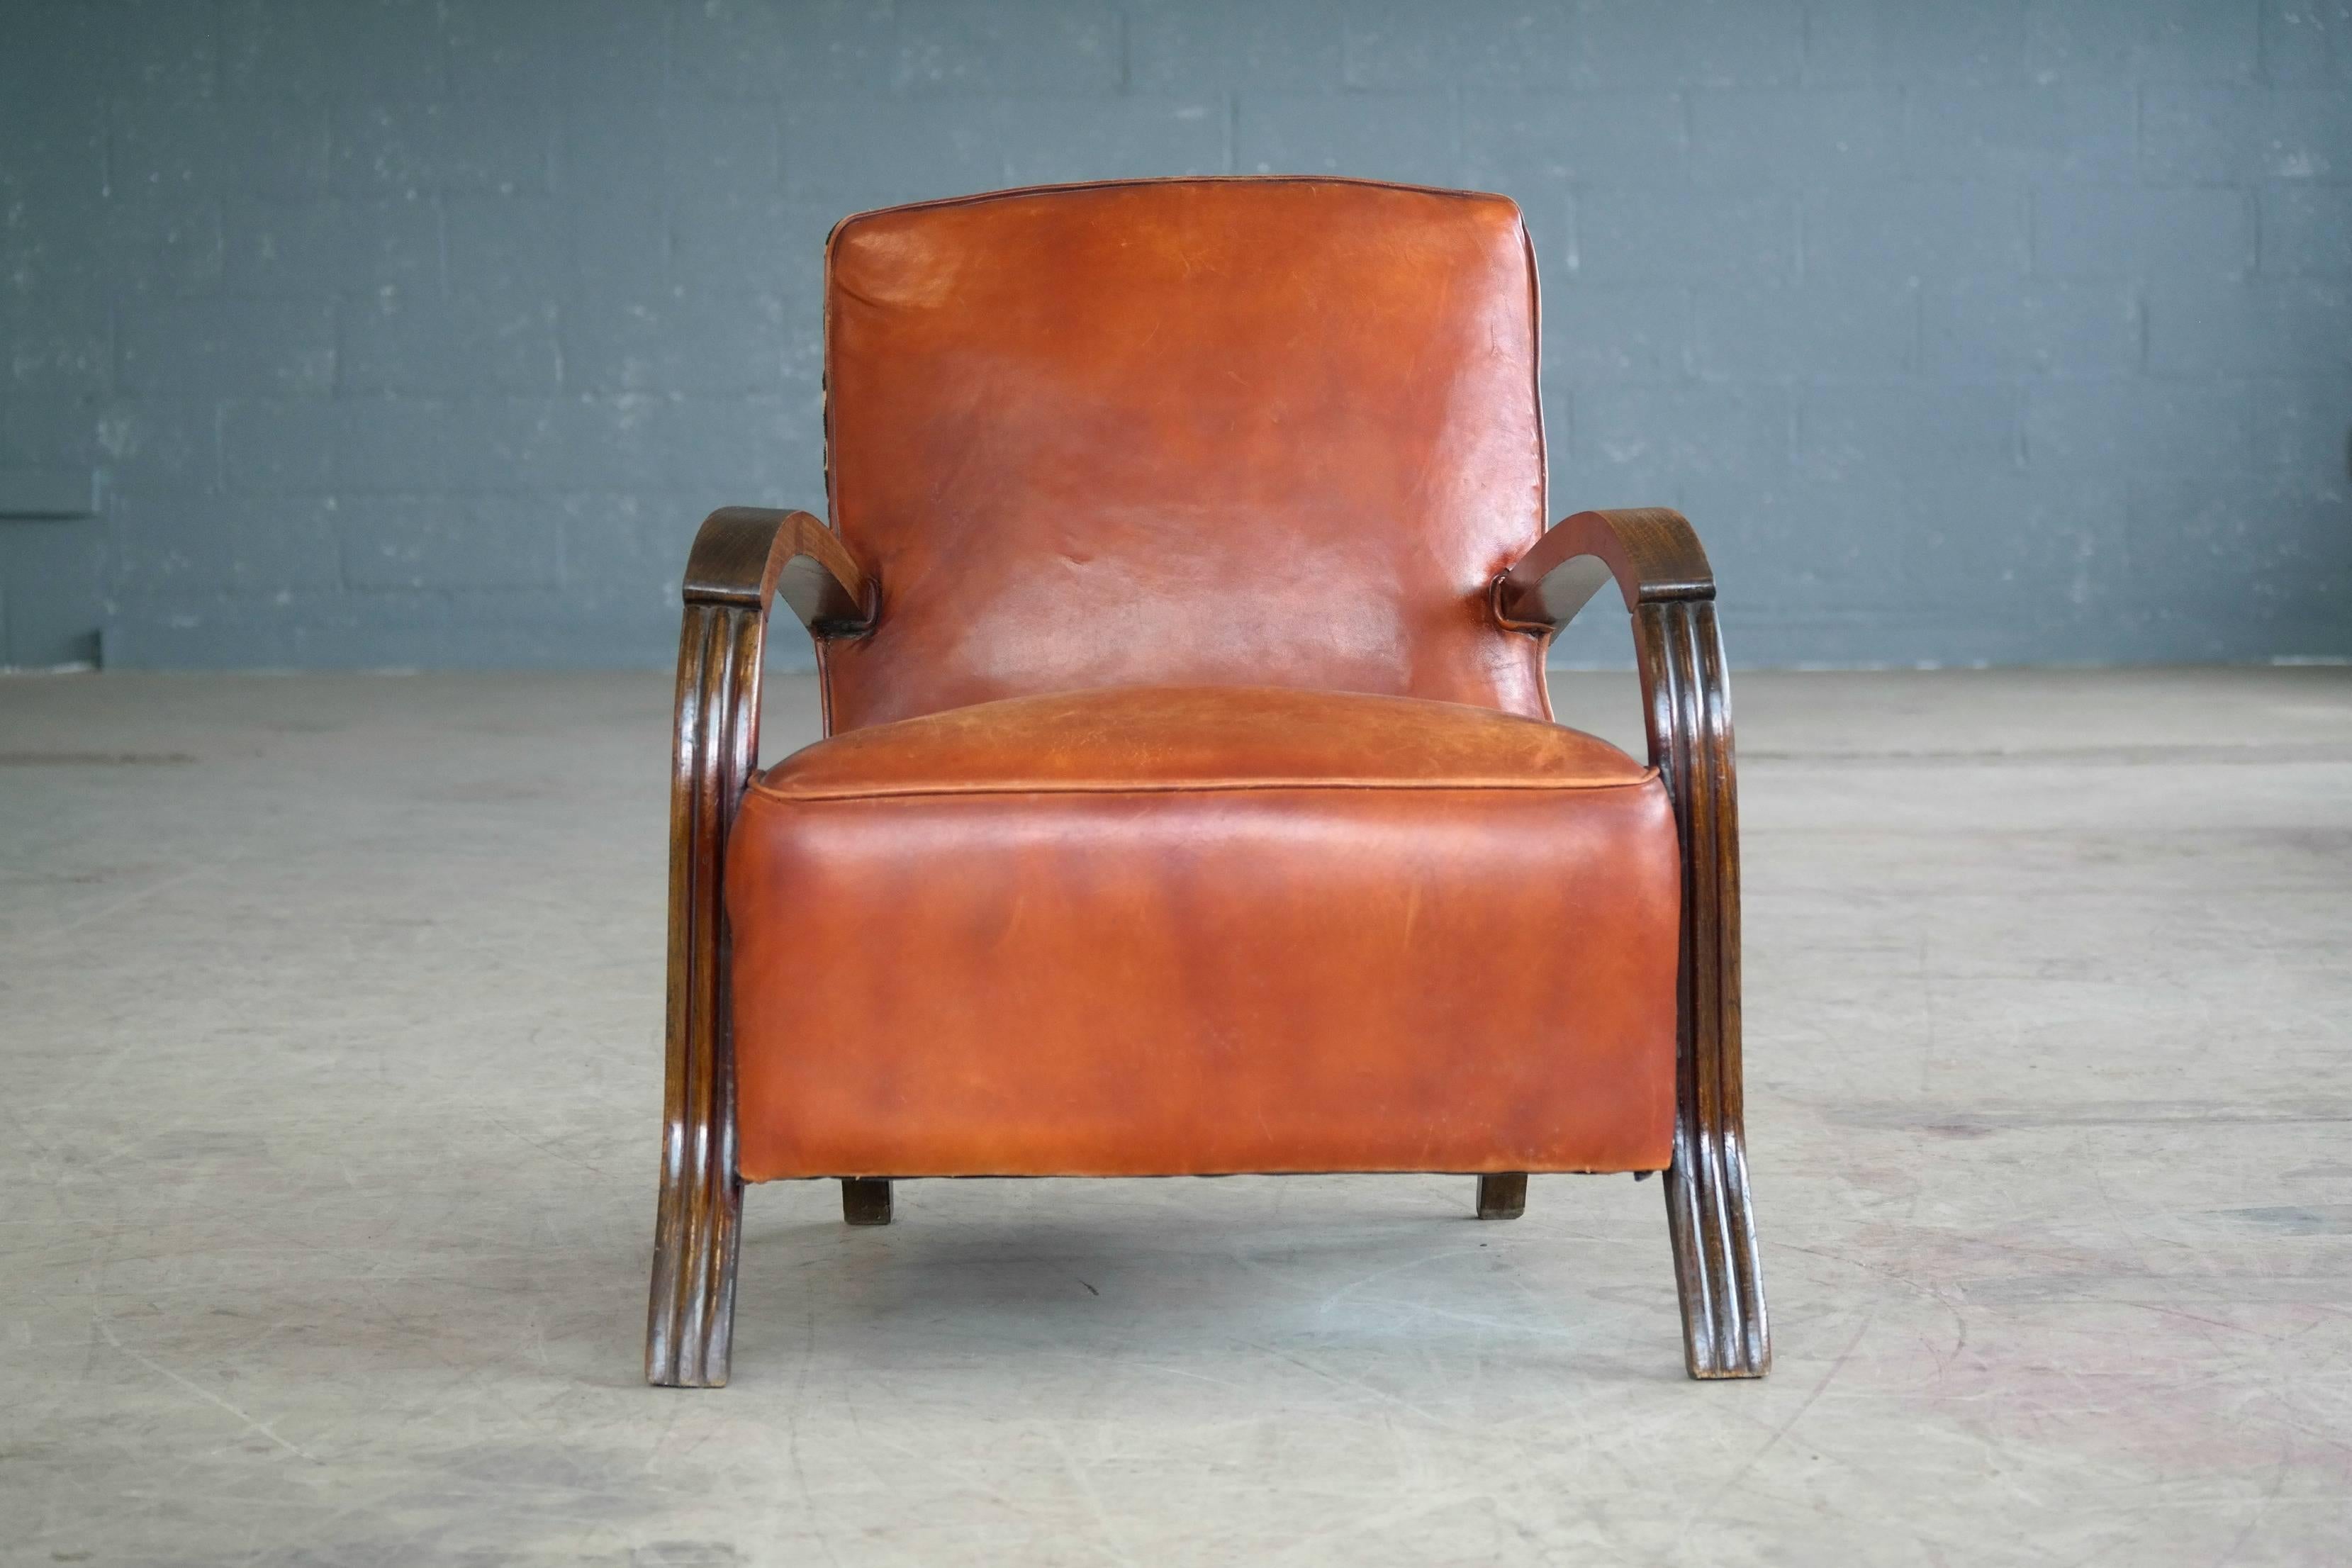 Very charming 1930s small lounge chair from Denmark. Carved wooden armrests in stained beech showing some nice patina and age wear. The chair has been re-upholstered in a nice aniline cognac colored leather at a later point with nice brass tack